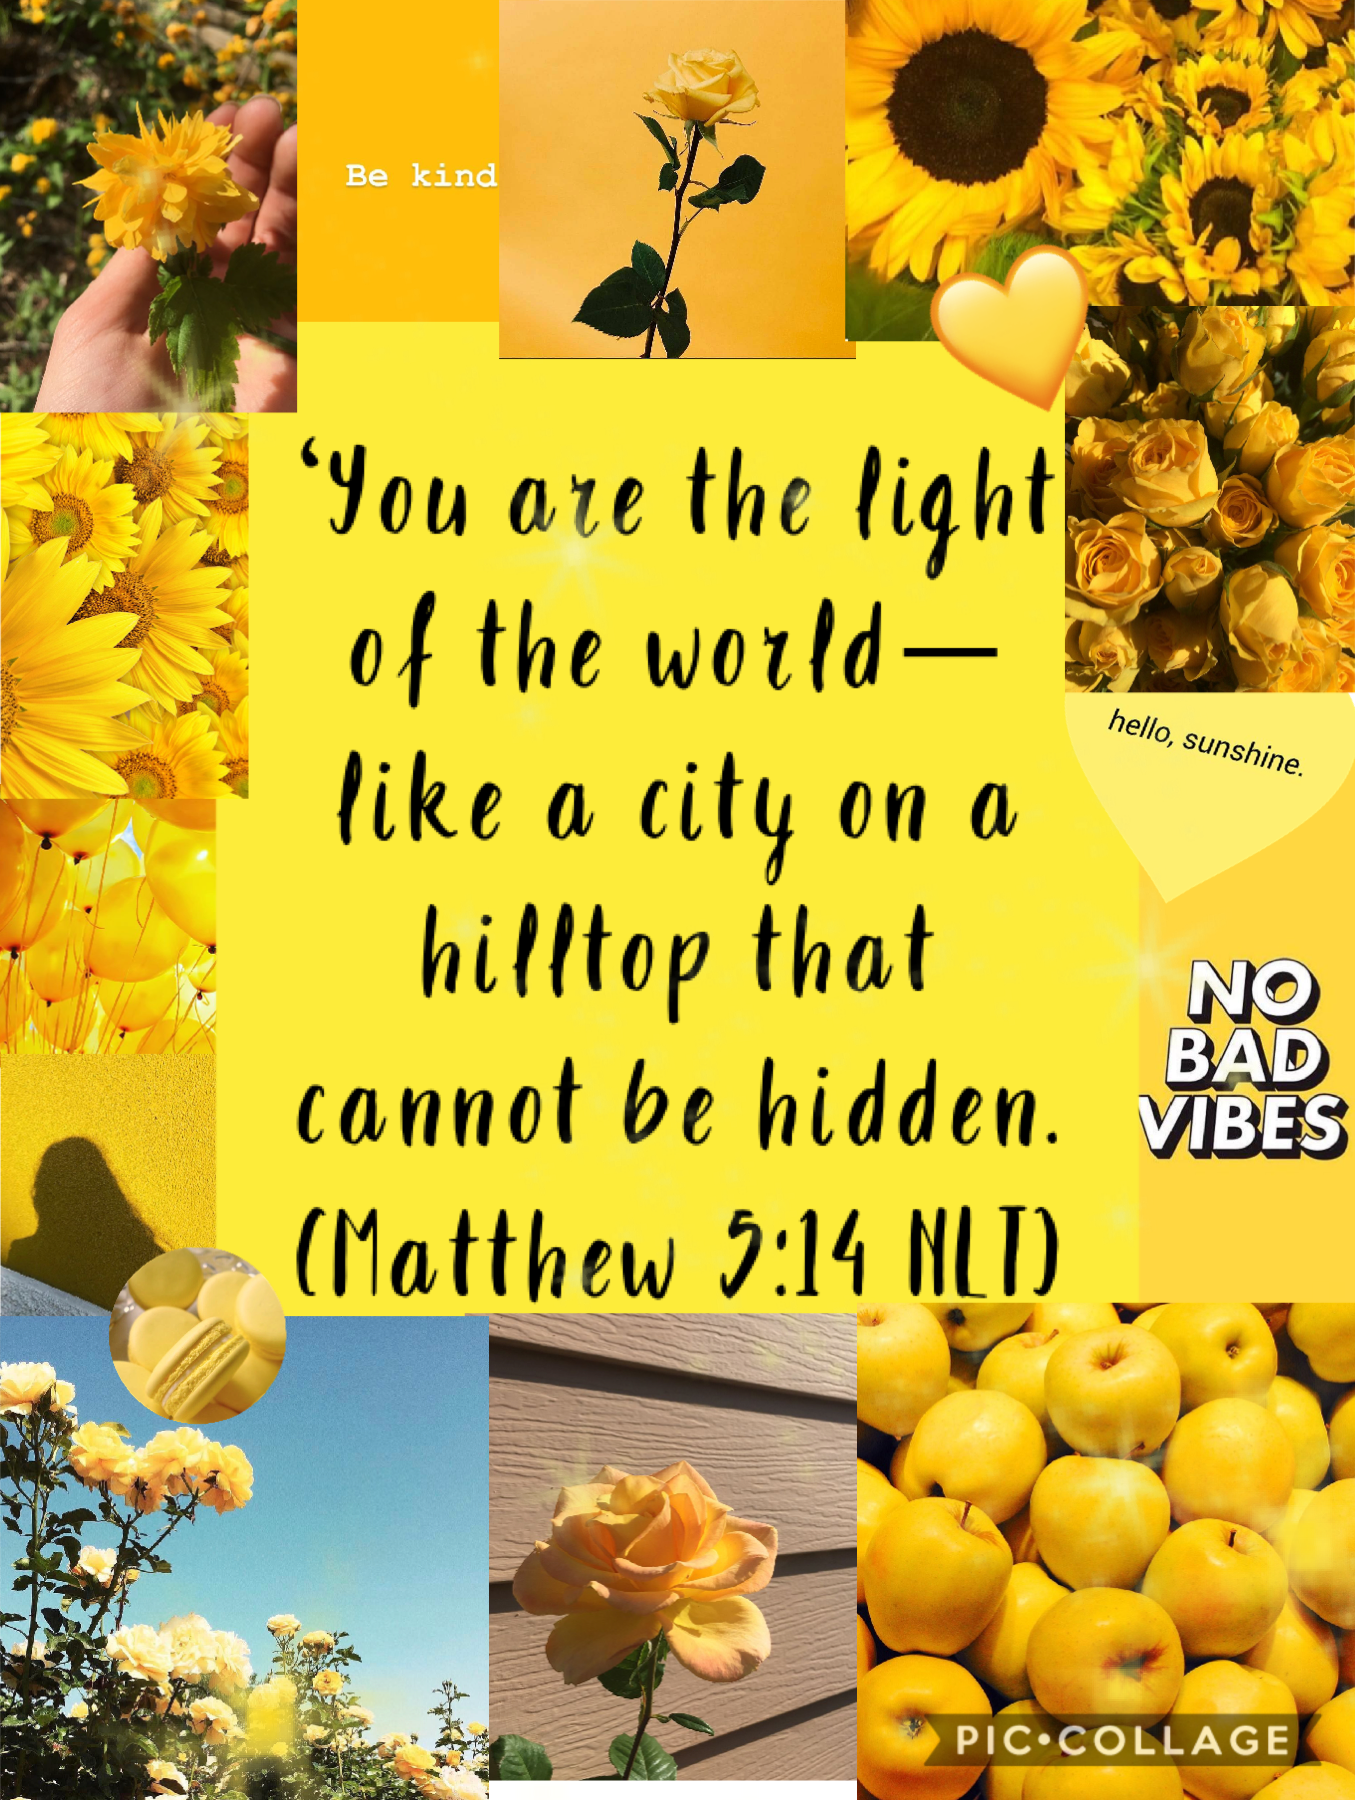 💛💛💛

#yellow #heart #aesthetic #verse #Bible #hope #joy #flower #collage #PC #friends #piccollage #happiness #lemons 